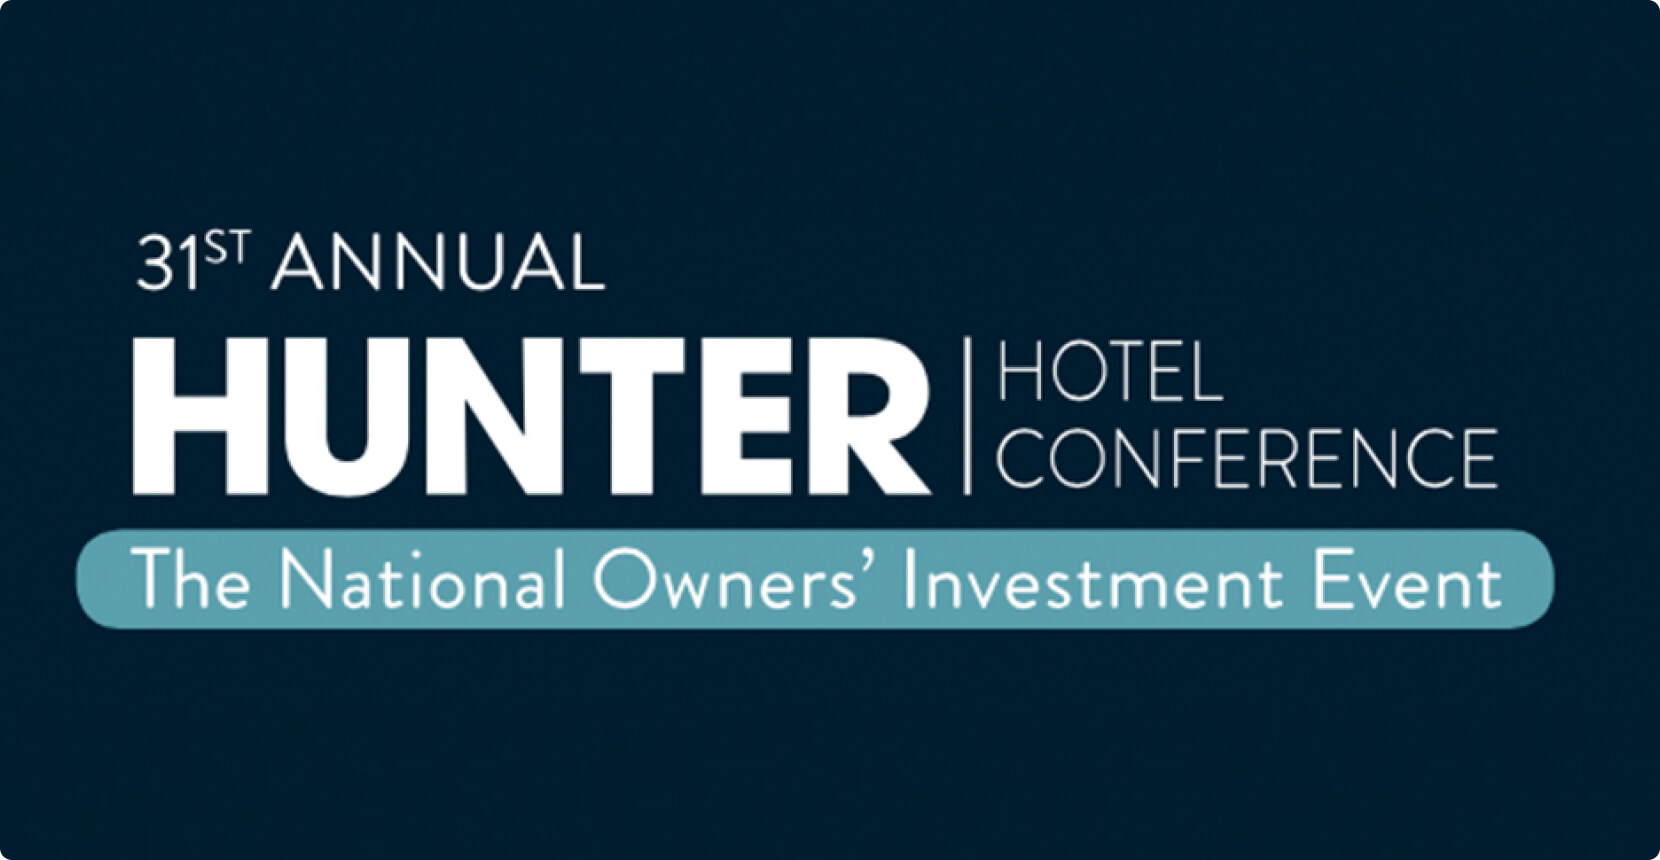 Hunter Conference 2019: A Celebration Of What’s Possible